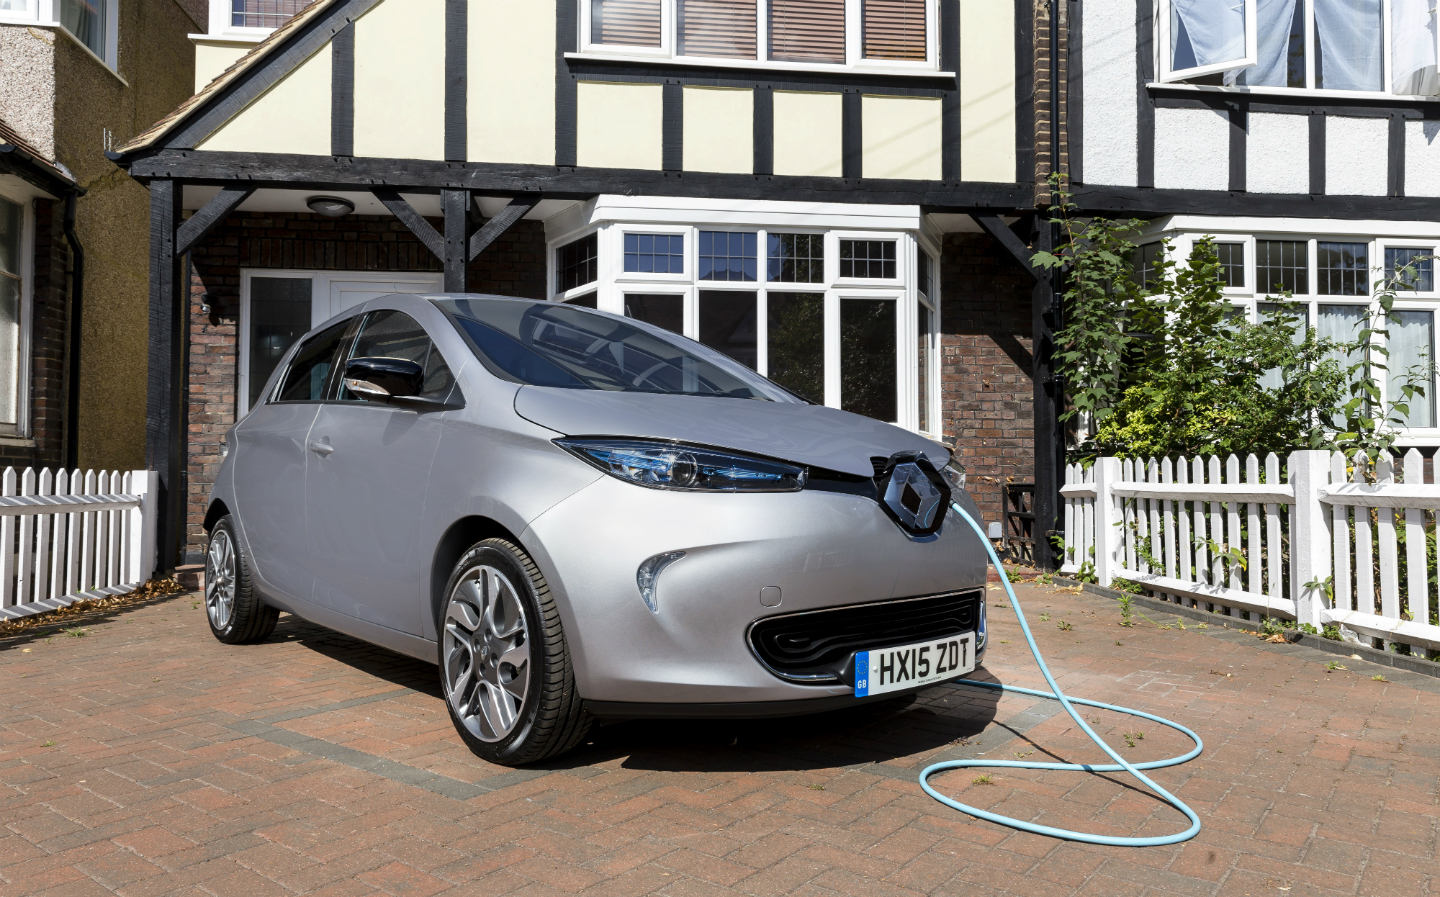 Three quarters of electric car owners use extension leads to charge their cars